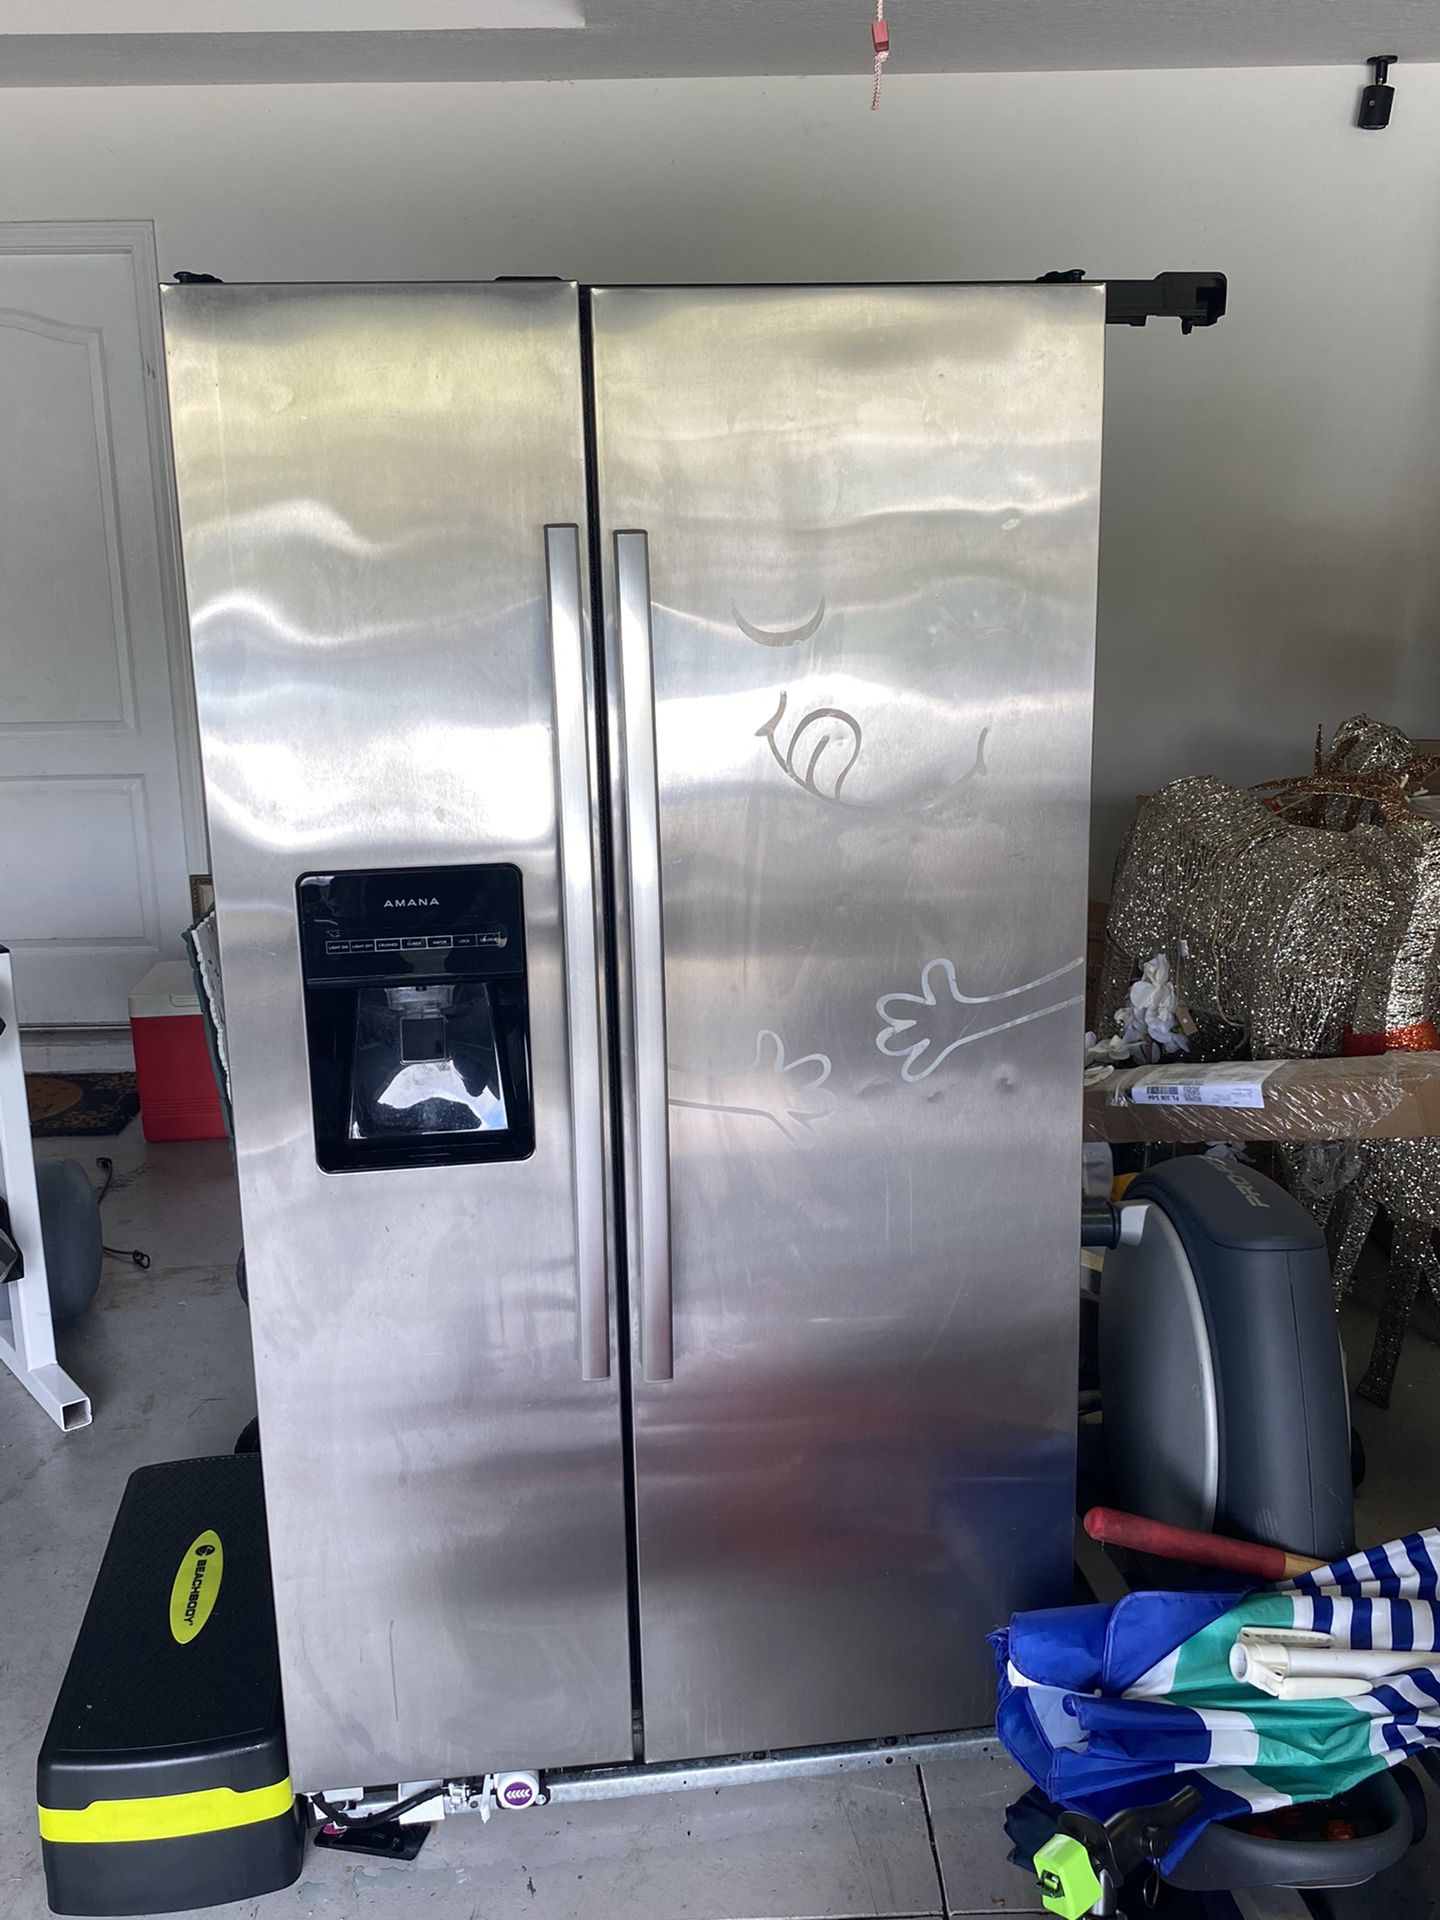 Amana Brand Few years old works great stainless steel refrigerator w/ ice maker and water